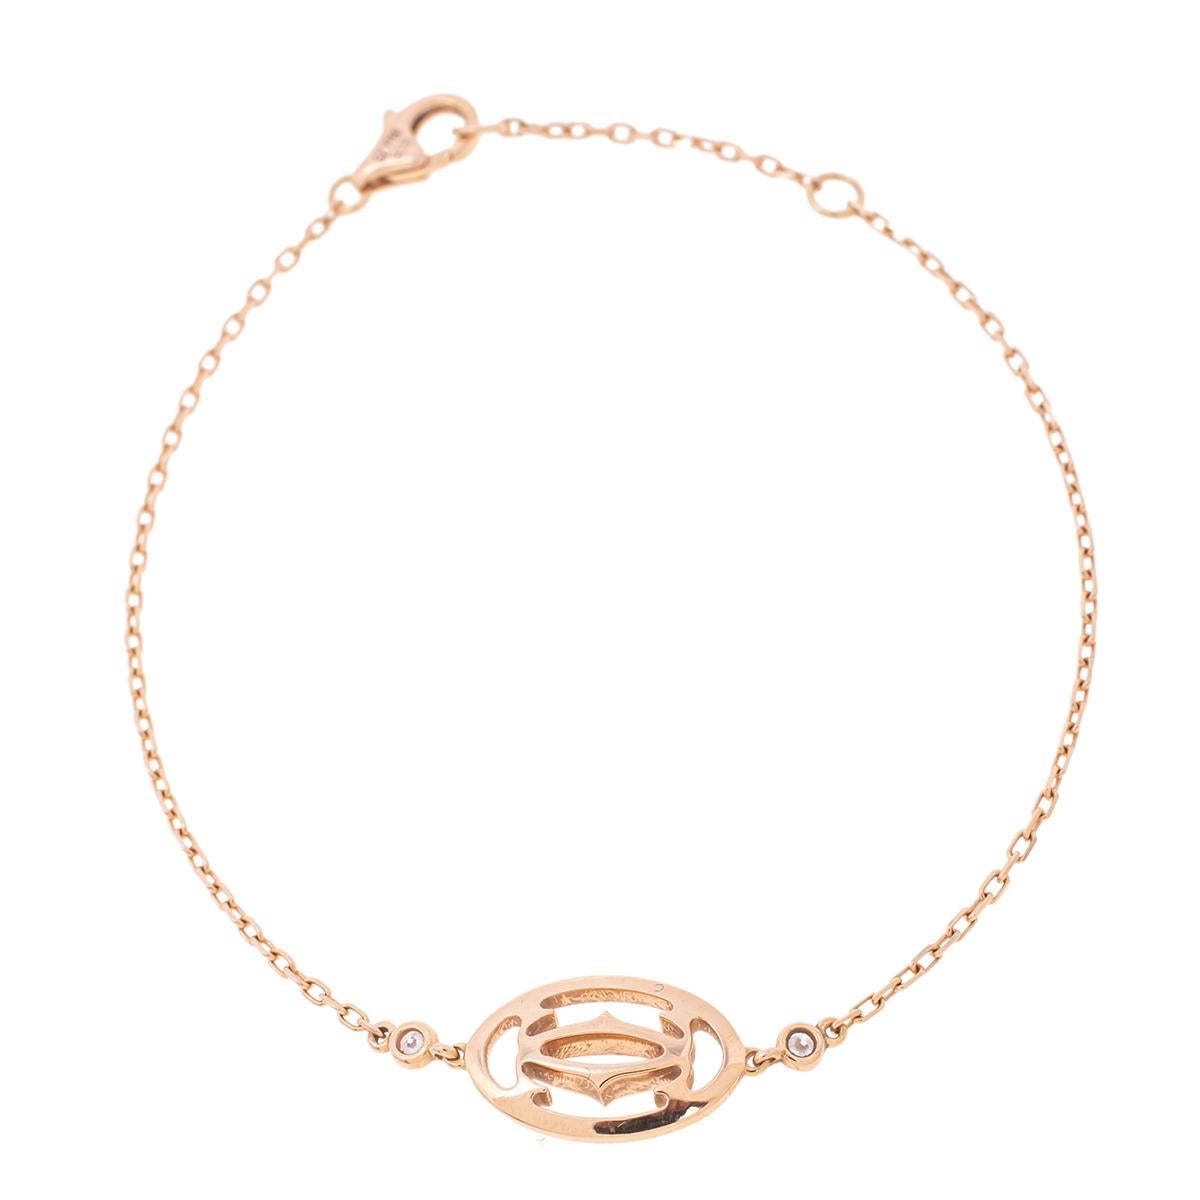 The 'Logo' collection bears the Cartier stamp as testimony to a jewelry-making tradition. The Double C signature initially employed by Louis Cartier elegantly adorns this bracelet, crafted from 18K rose gold, featuring two round brilliant cut